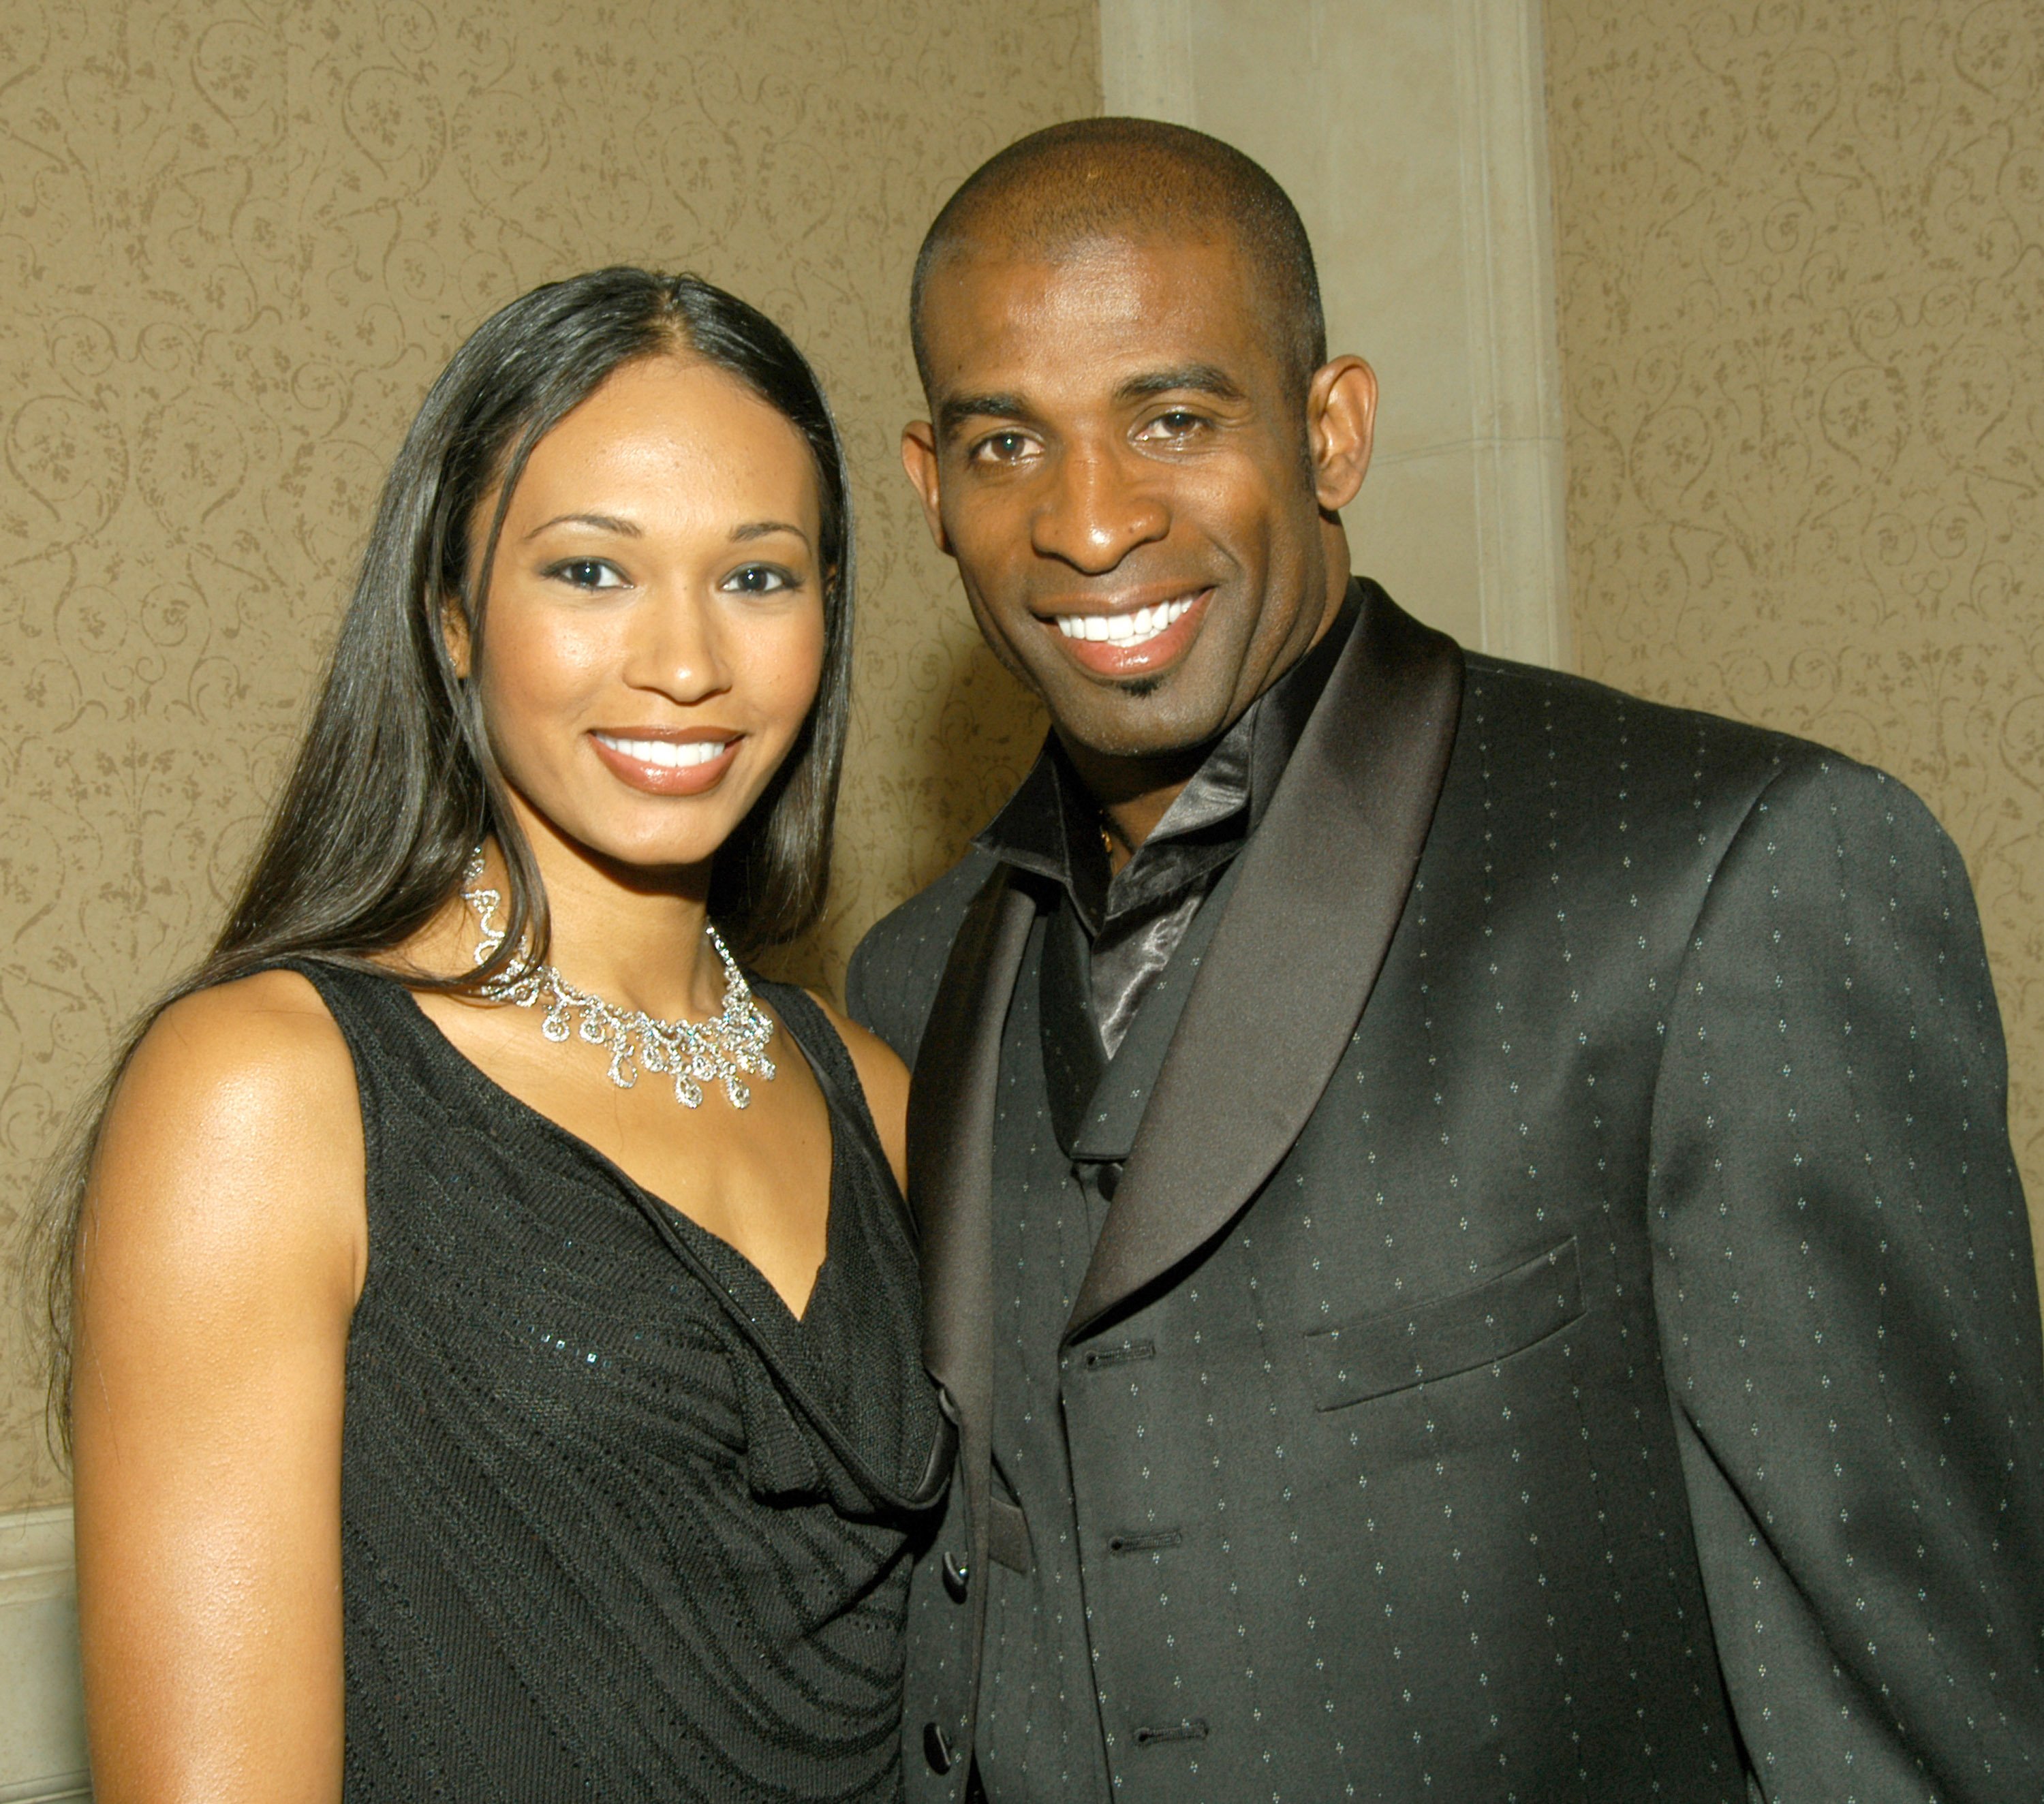 Carolyne Chambers Is Deion Sanders' First Wife and the Mother of Two of